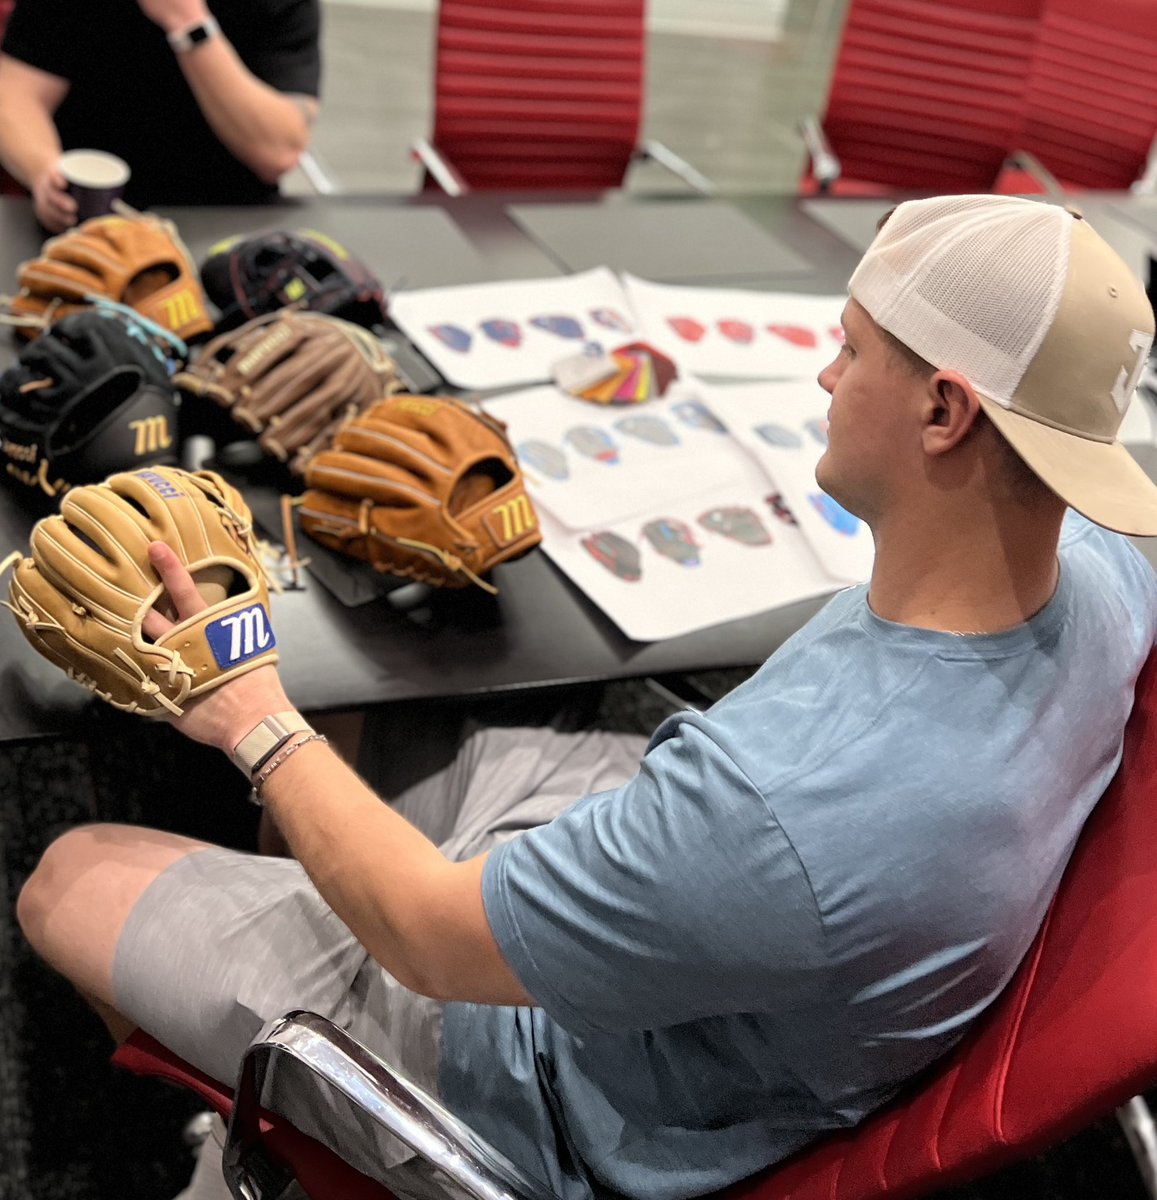 Throwback to the @josh6jung design session with @GloveCowboy. After leading all third basemen in fielding percentage this past season, what color combo will they cook up for 2024?